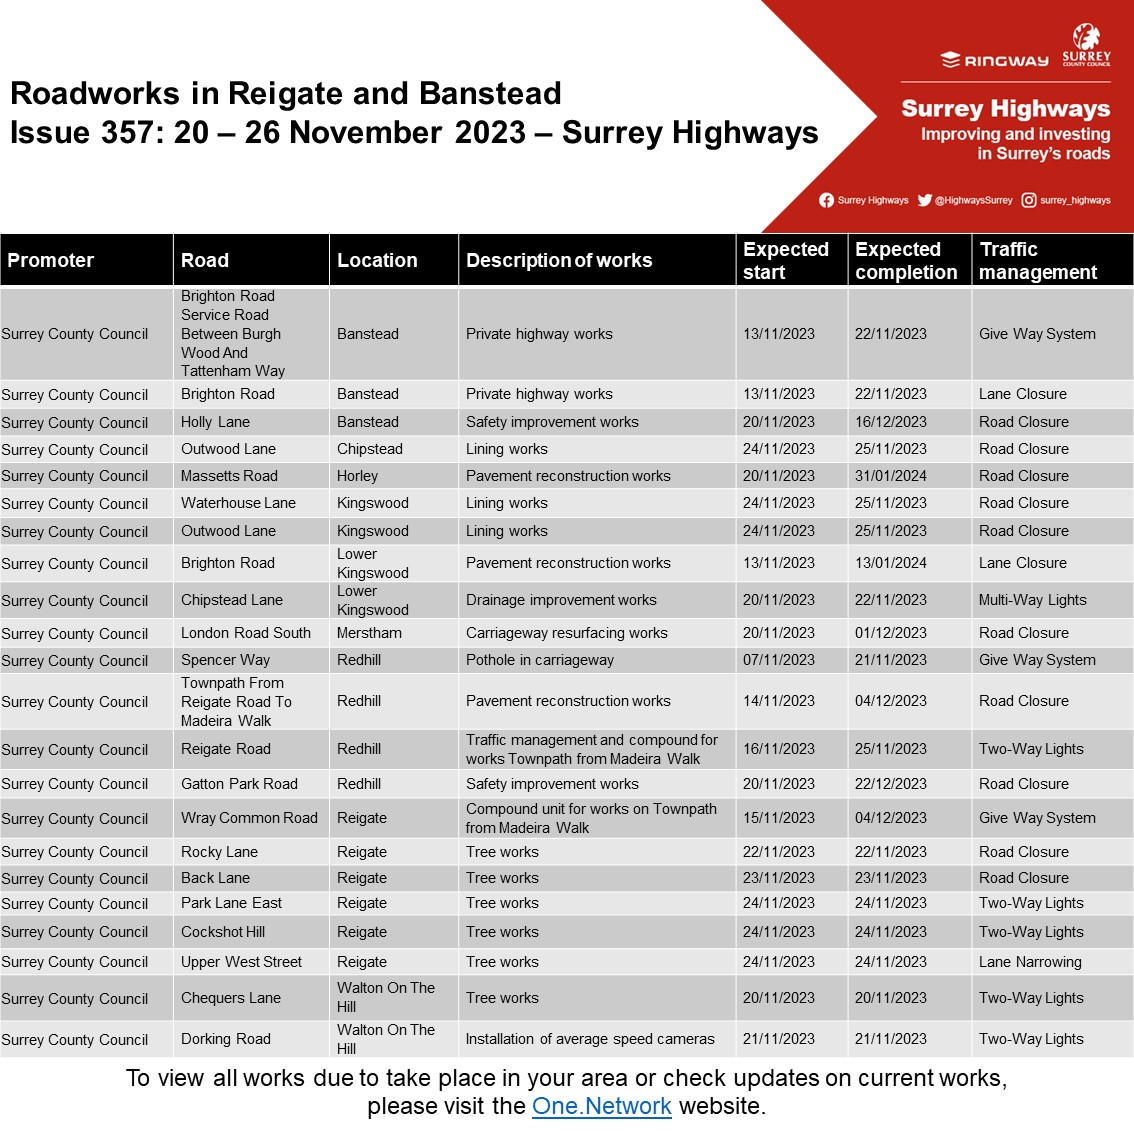 ROADWORKS SCHEDULED FOR NOVEMBER IN REIGATE AND BANSTEAD